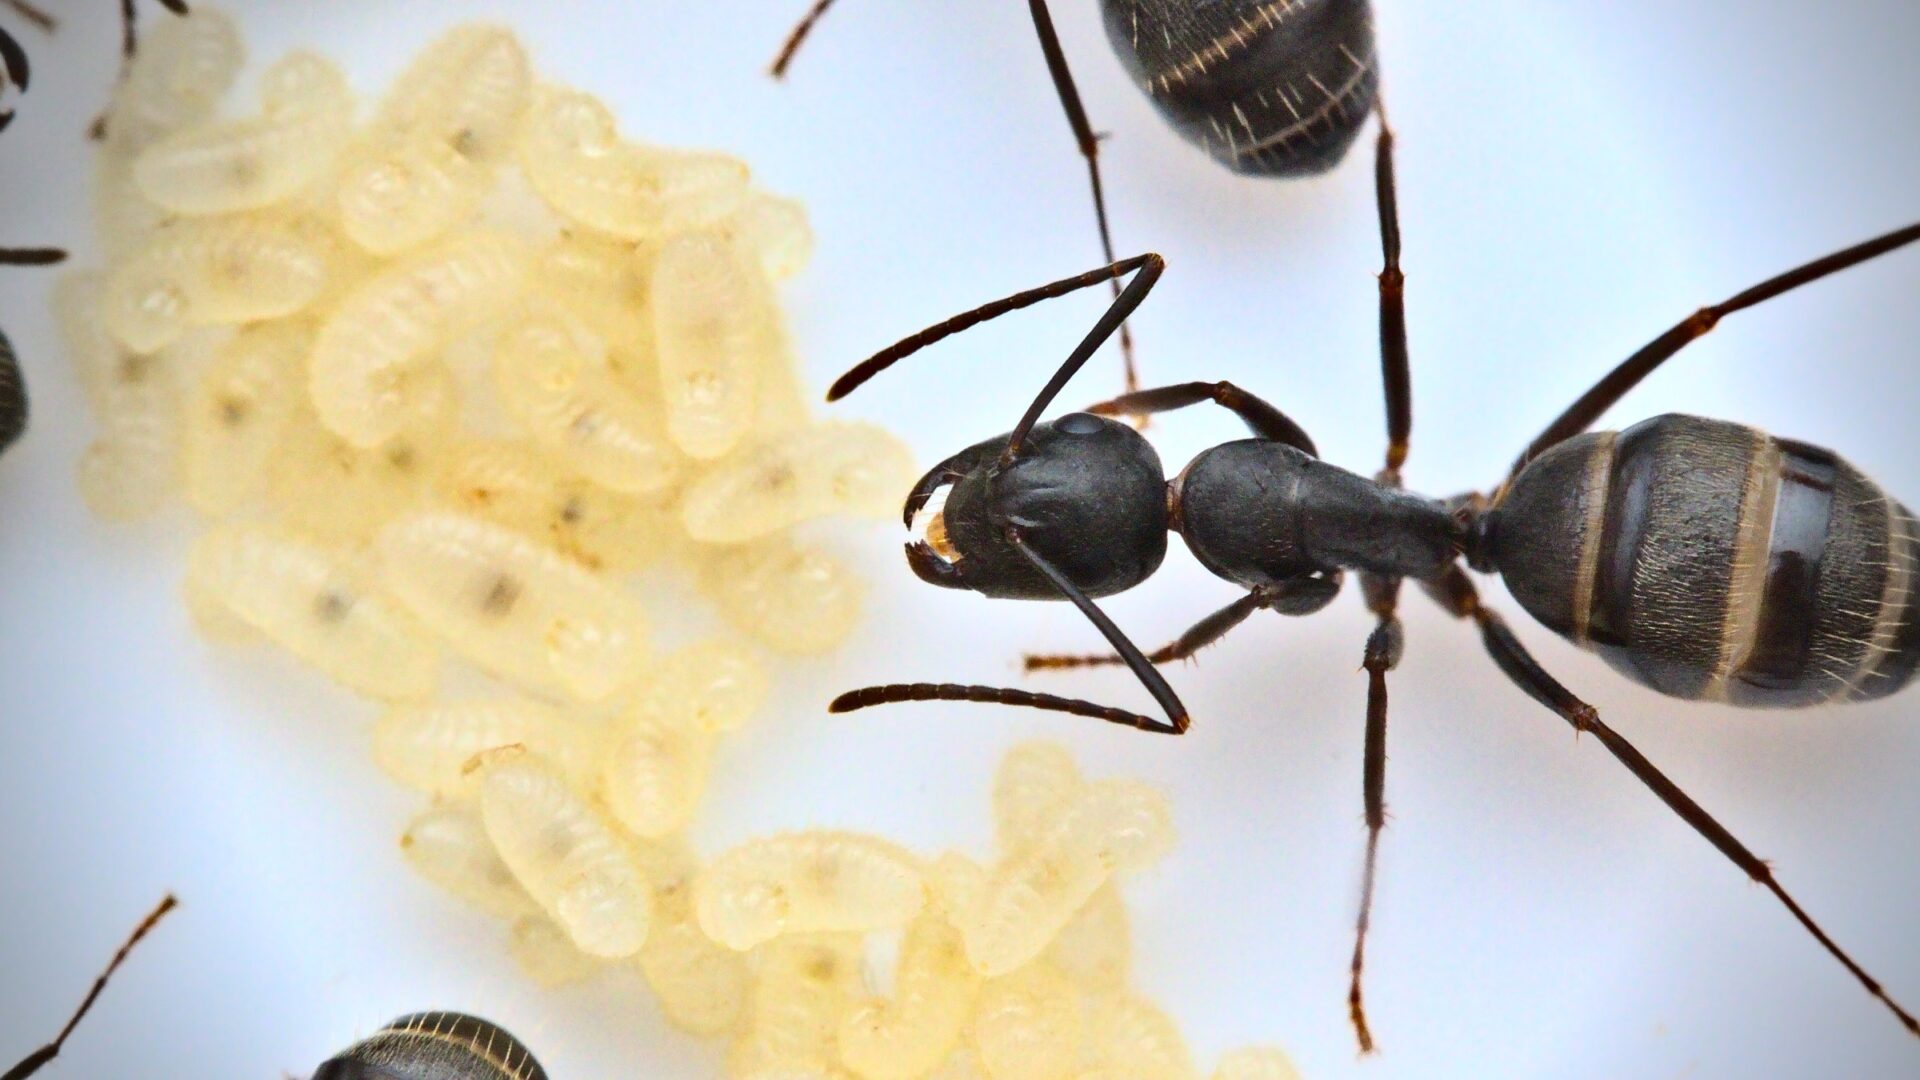 A Camponotus pennsylvanicus worker tends to larvae.